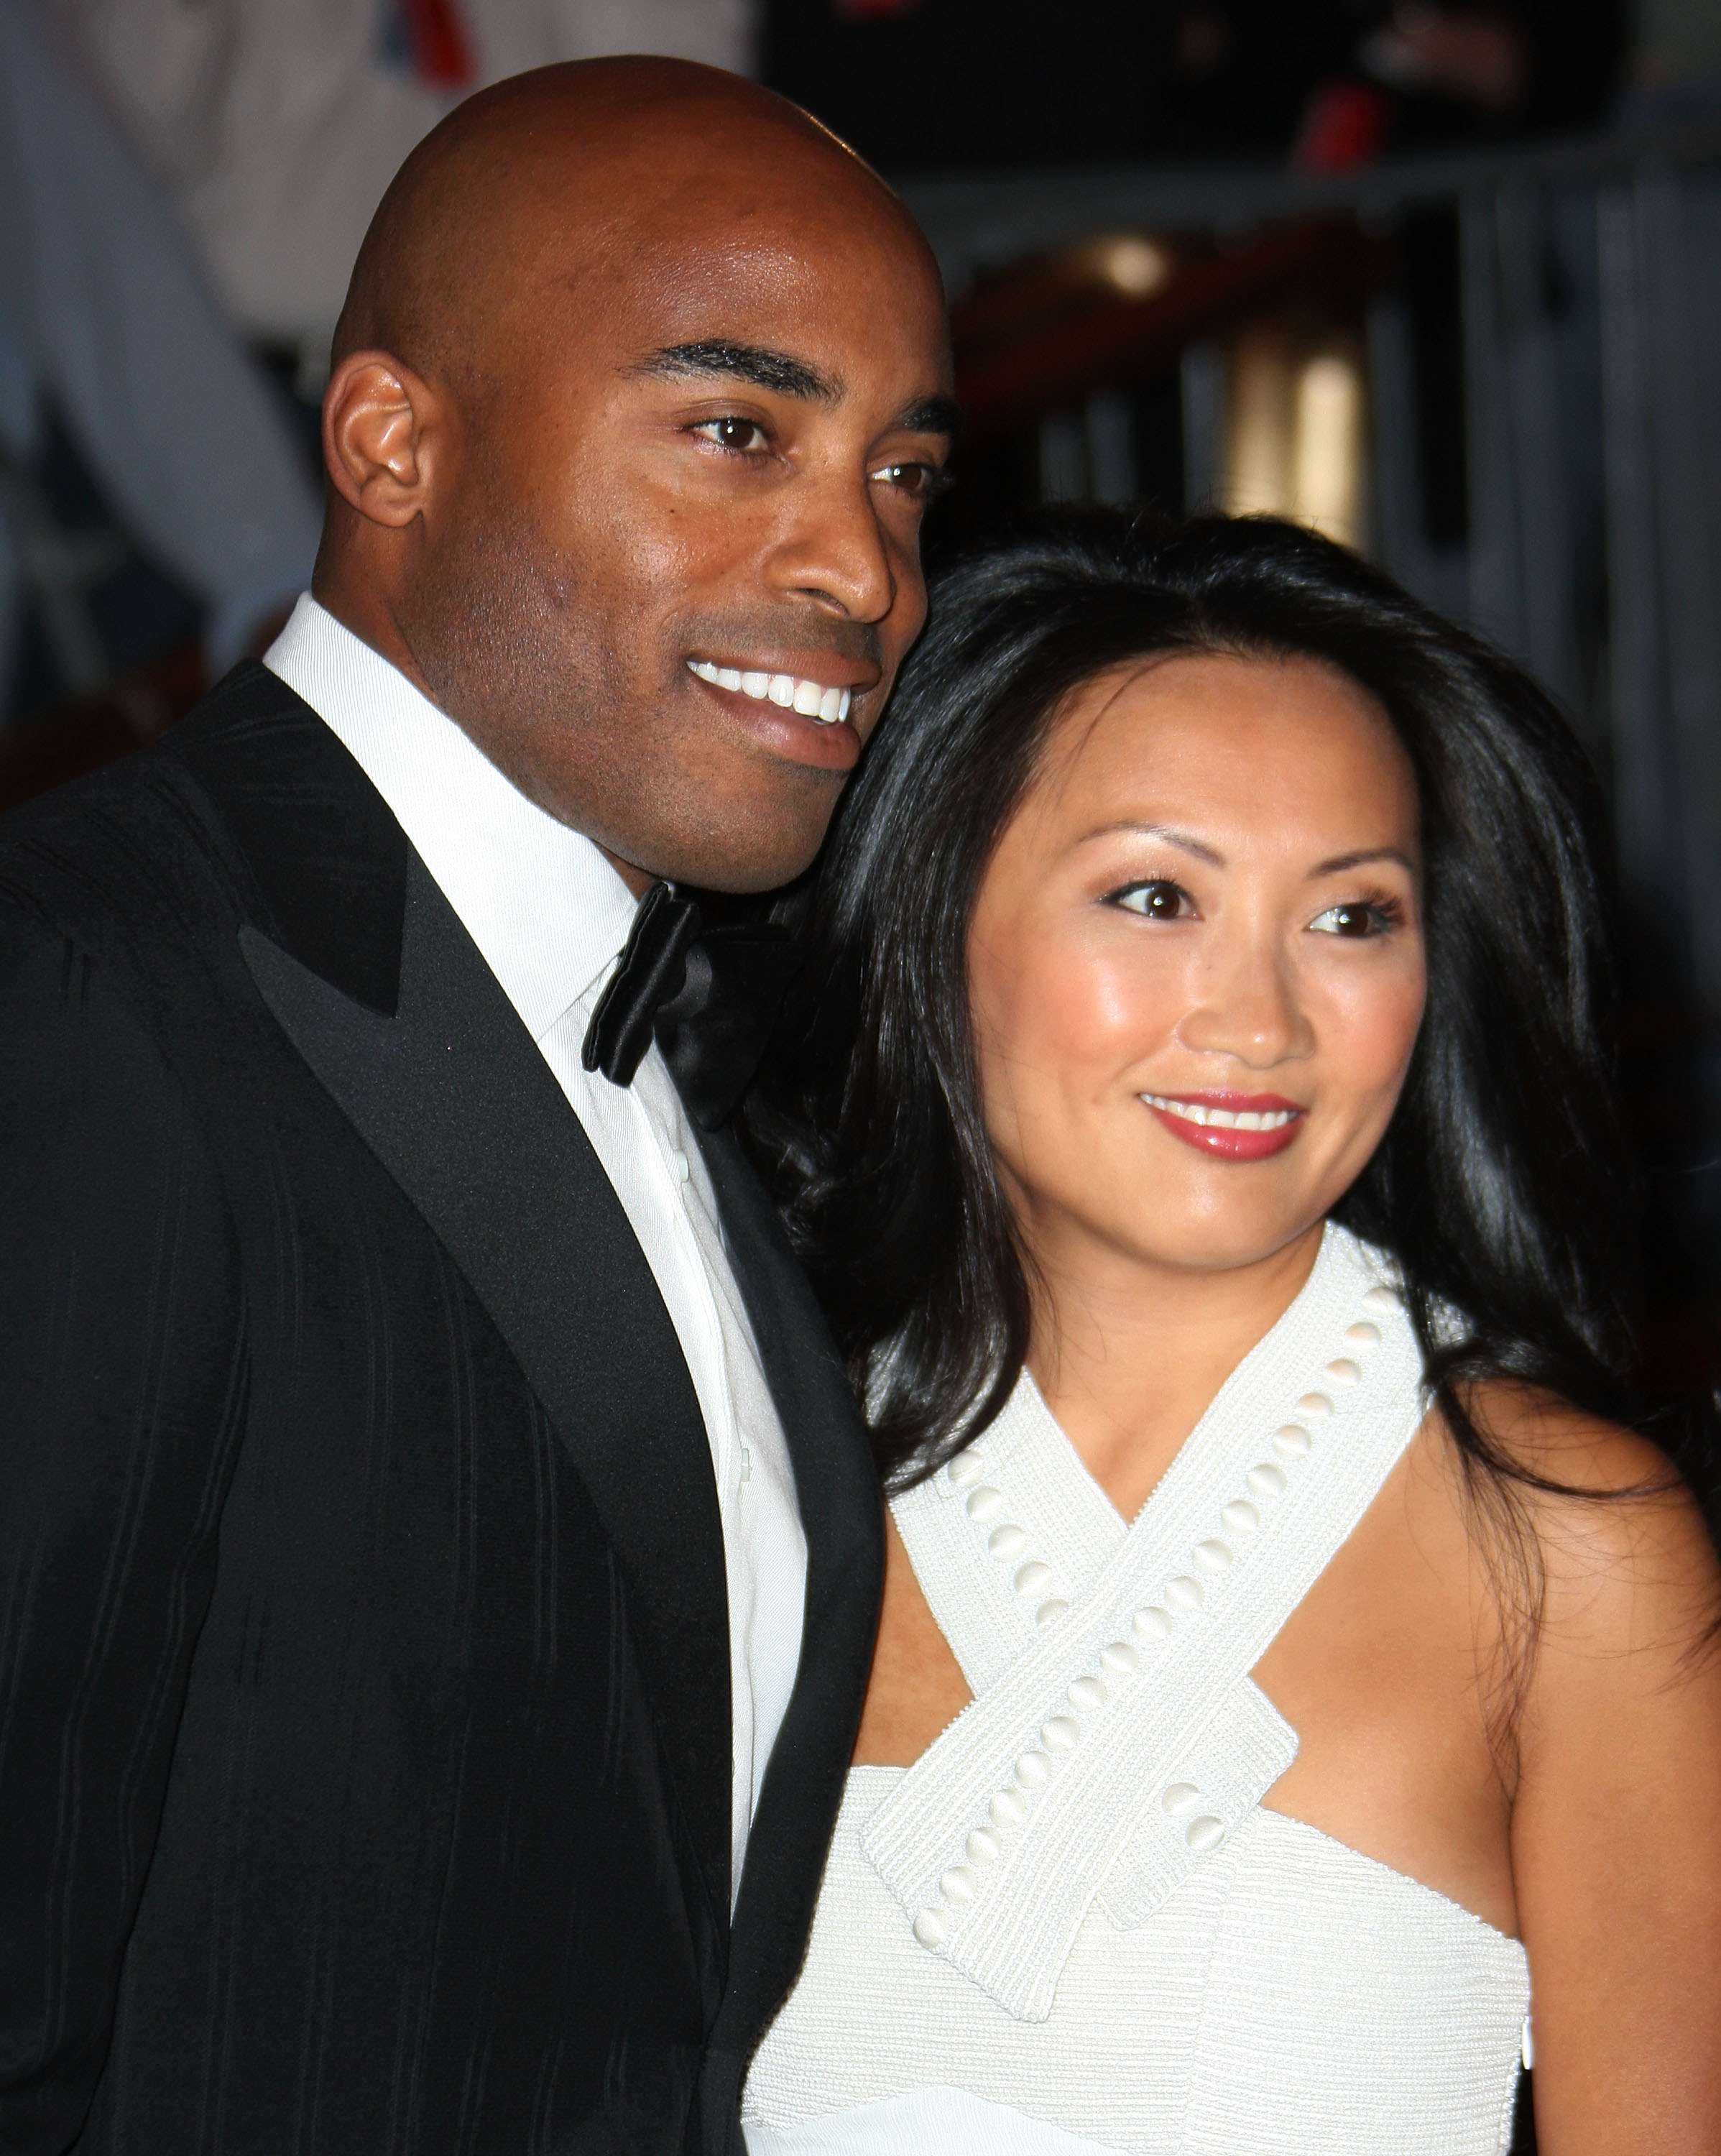 Tiki Barber and Ginny Cha arrive at the Metropolitan Museum of Art Costume Institute Gala, Superheroes: Fashion and Fantasy, held at the Metropolitan Museum of Art on May 5, 2008, in New York City. | Source: Getty Images